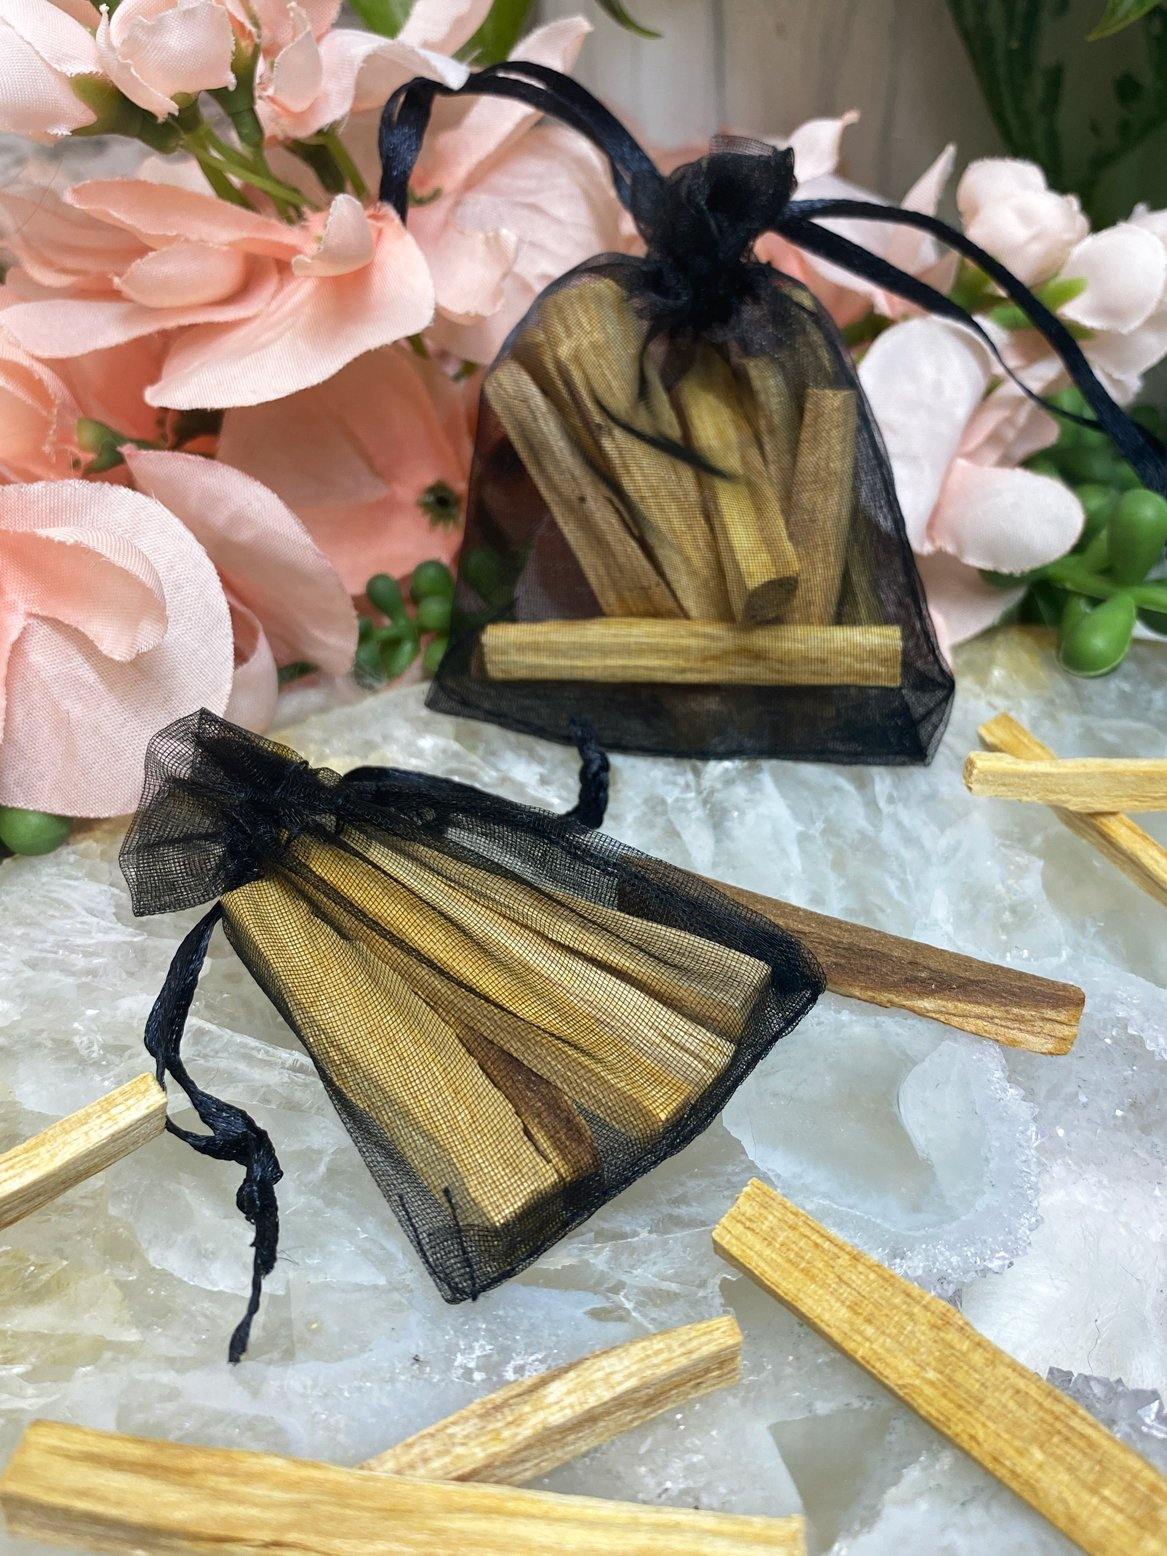 Mini-Palo-Santo-Wood-Travel-Set-for-Crystal-Home-Cleansing